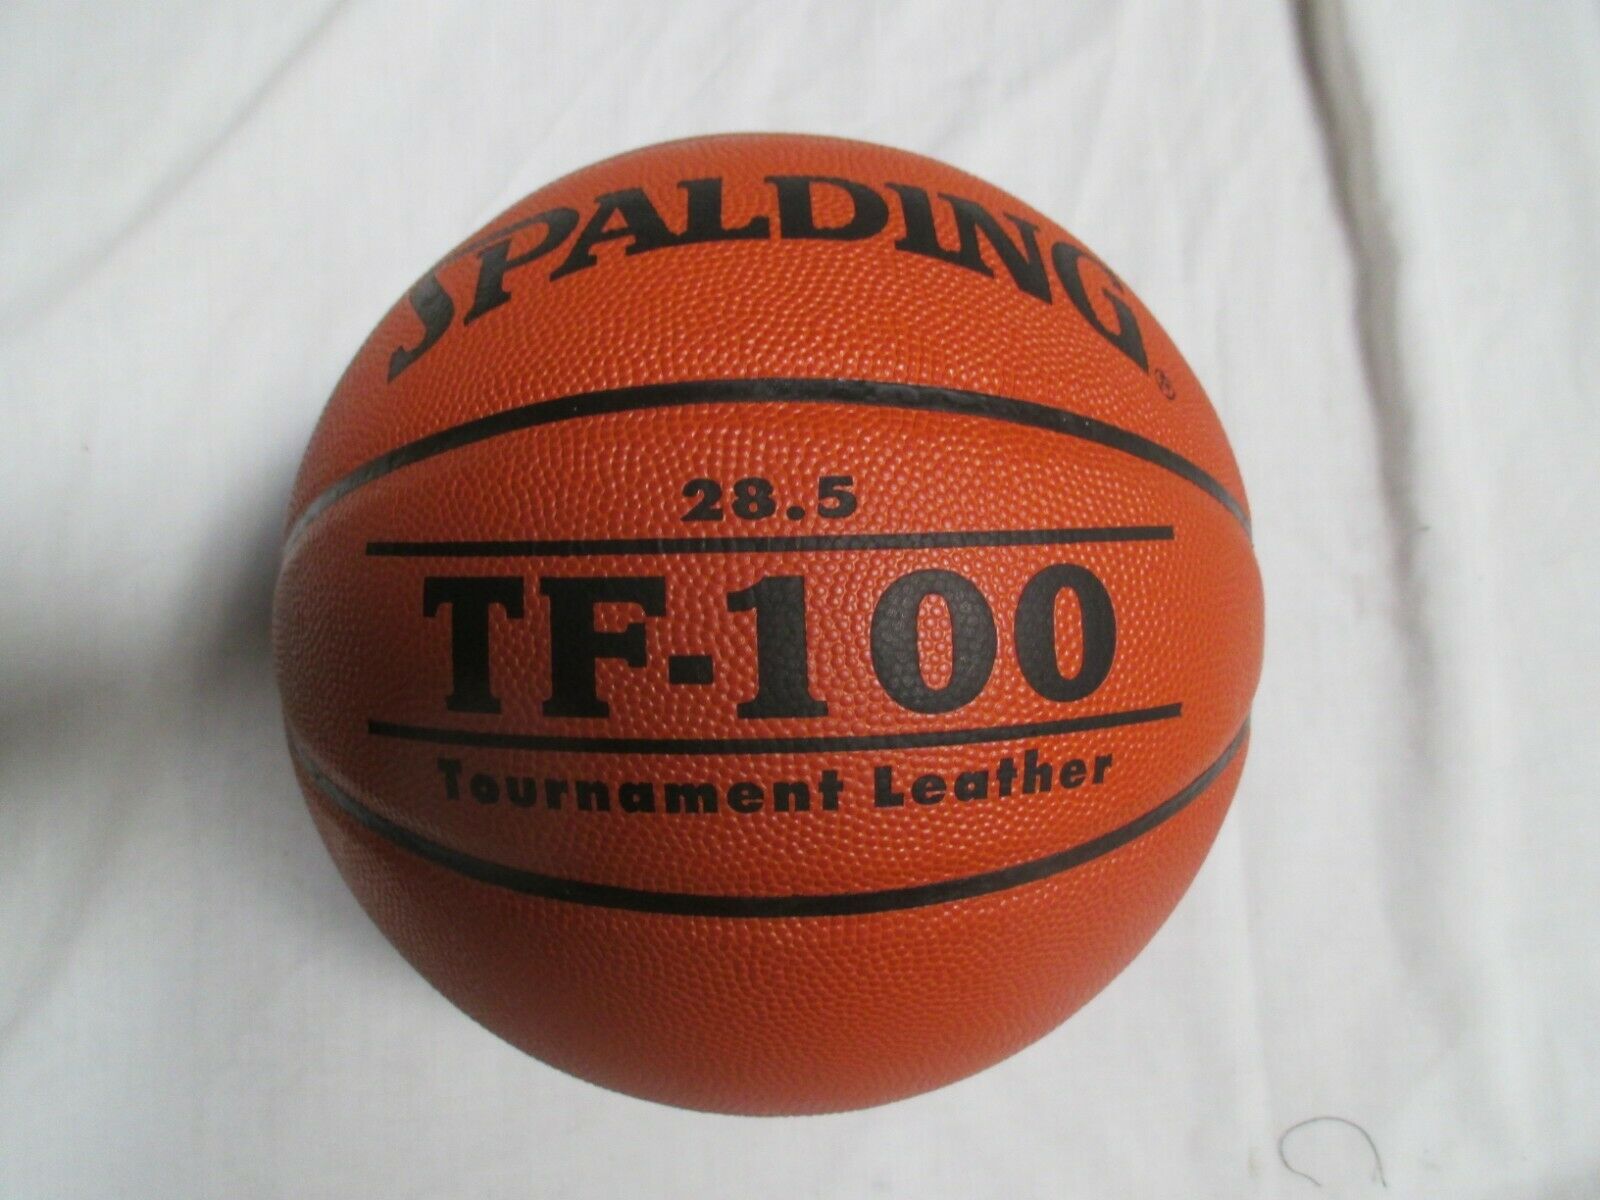 SPALDING TF100 TOURNAMENT LEATHER NFHS  BASKETBALL OFFICIAL  SIZE 28.5